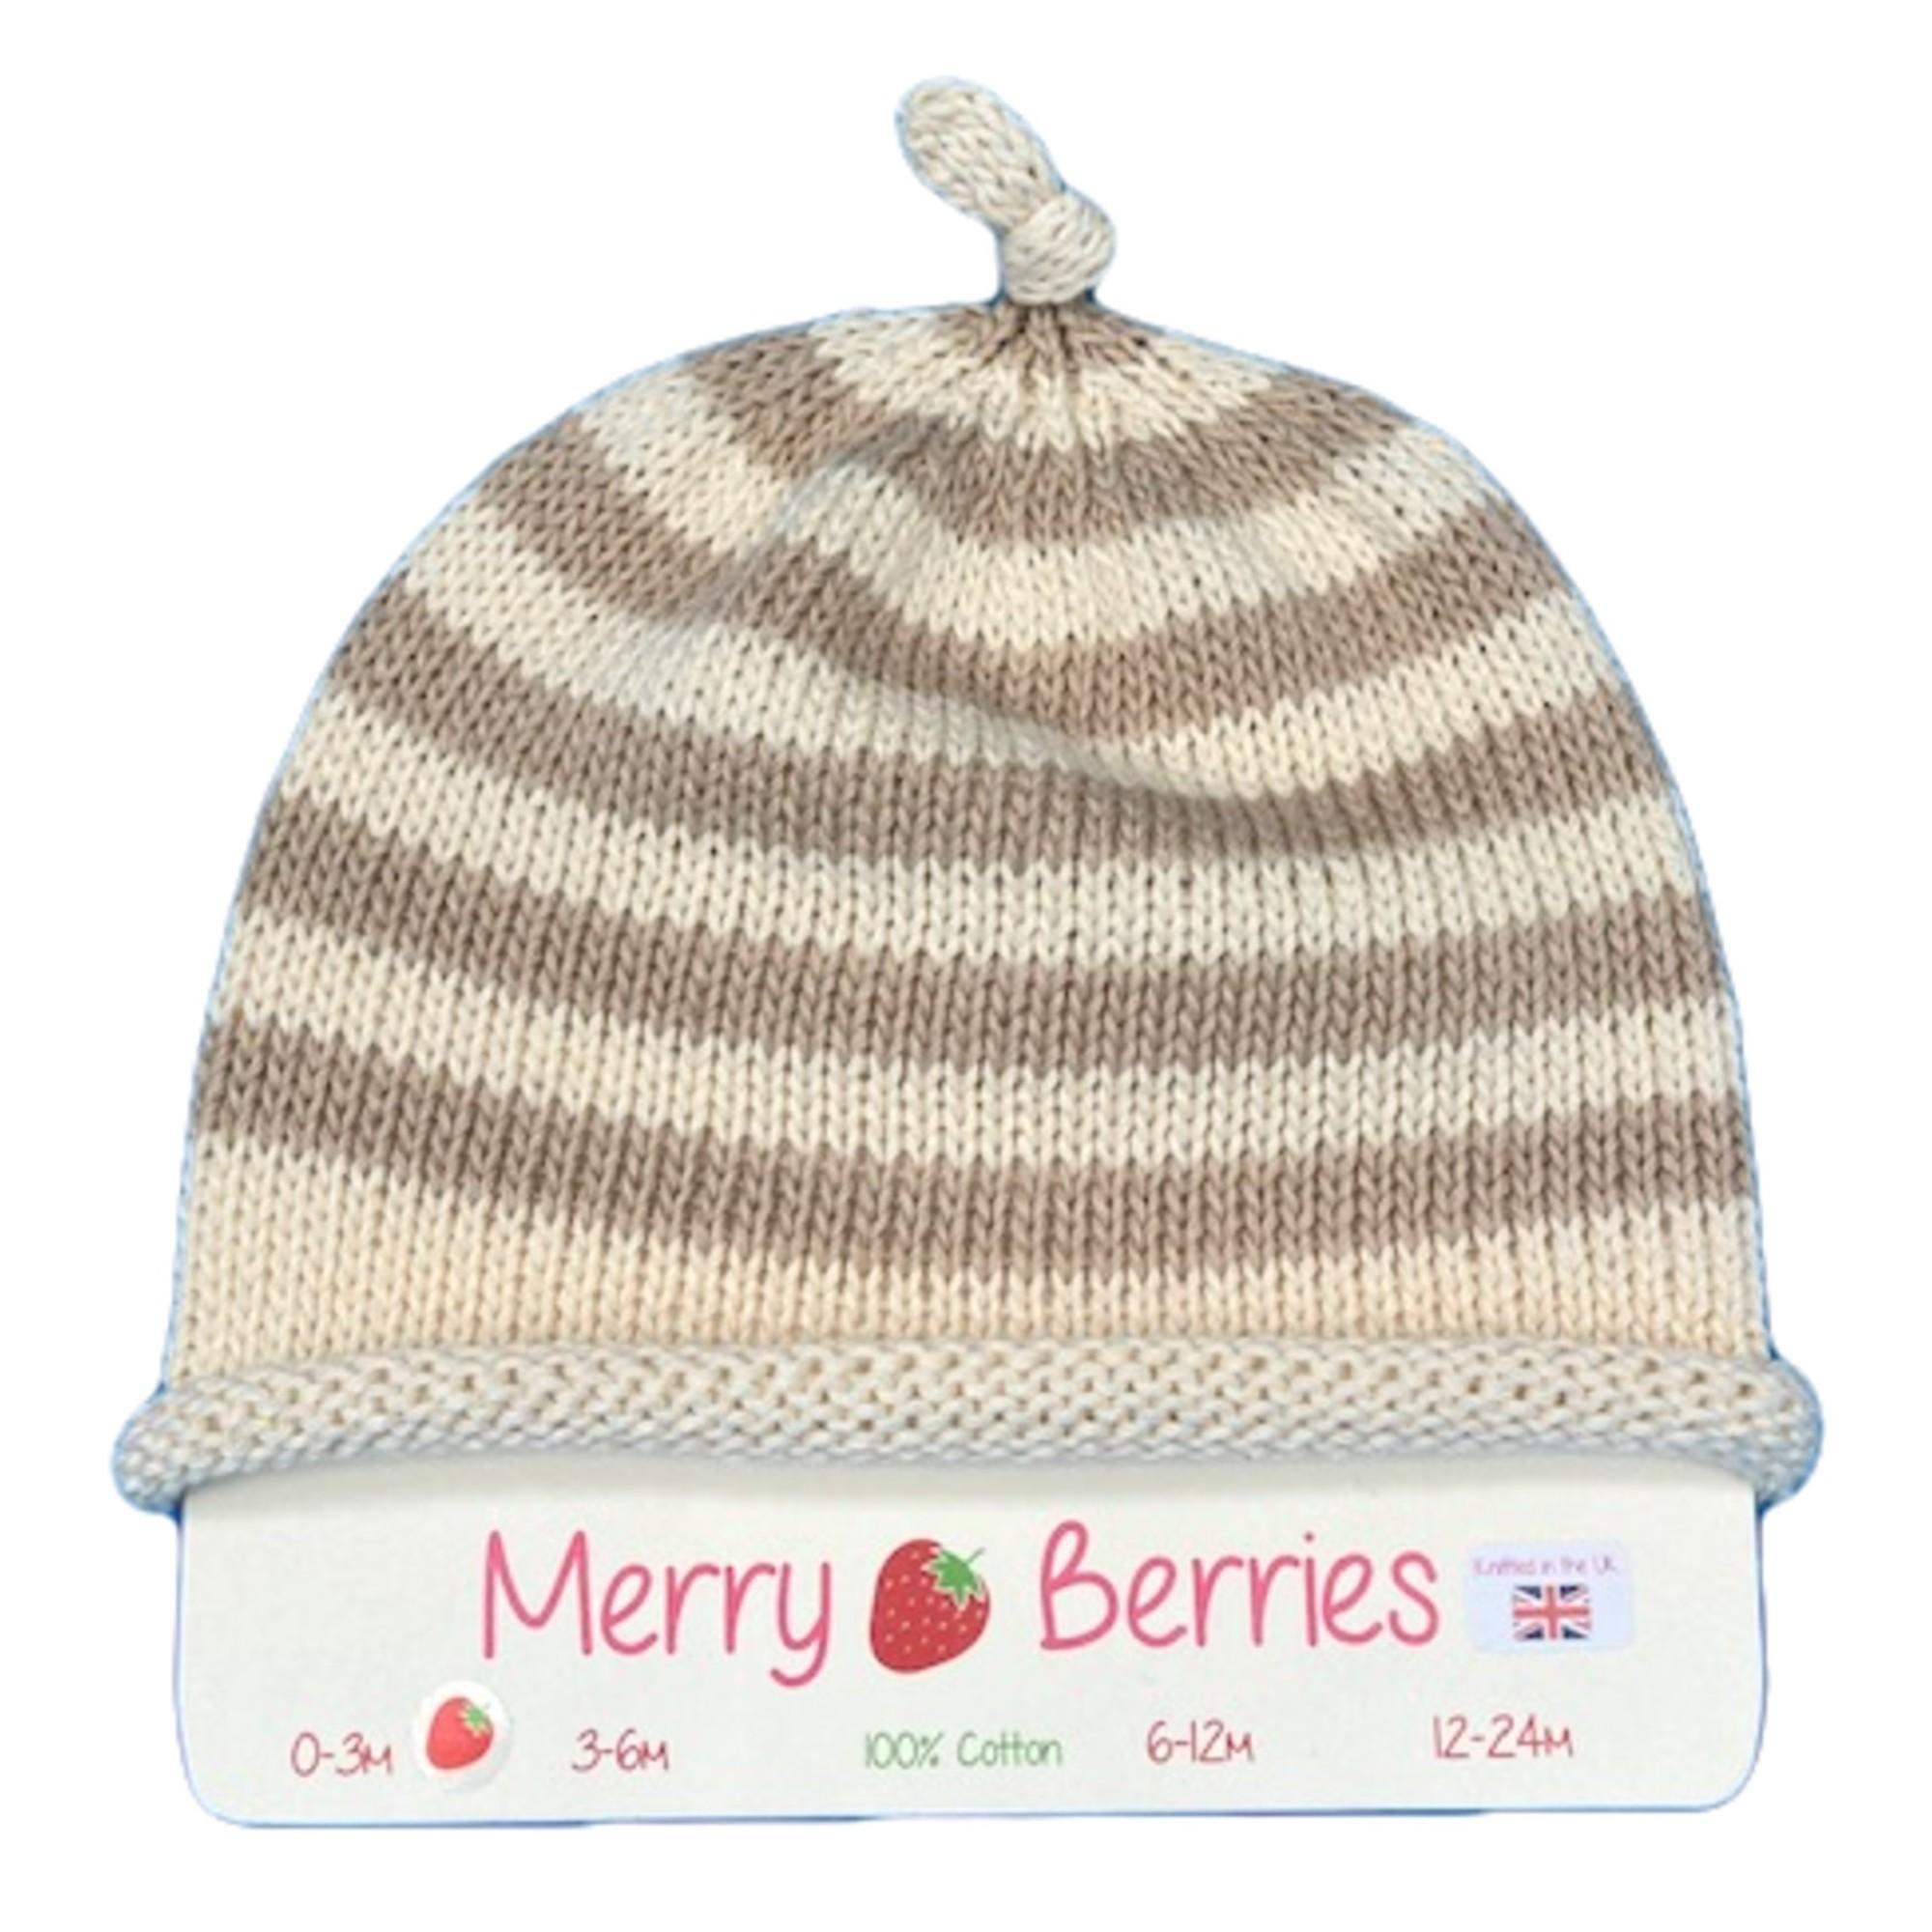 Merry Berries - Oat striped Topknot Knitted baby Hat-0-24mths-Cotton